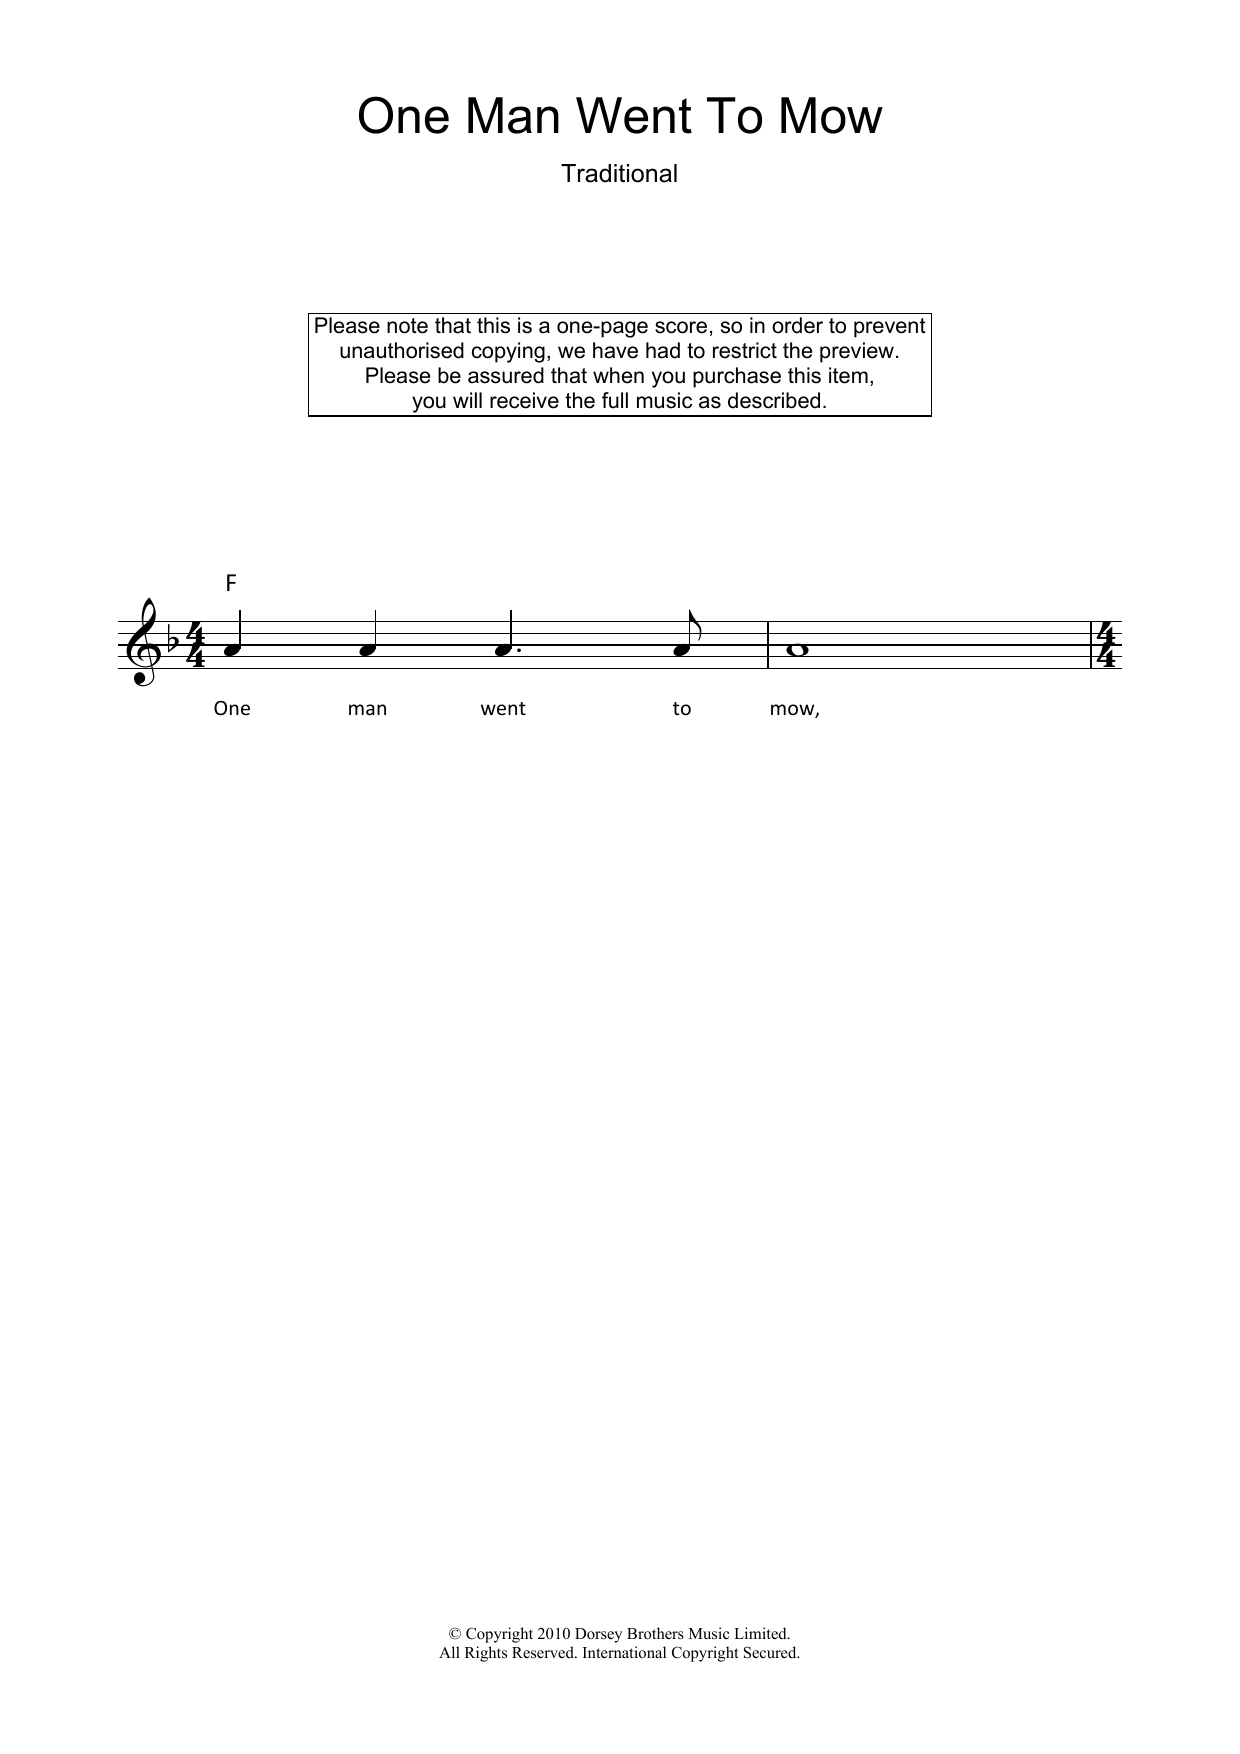 Download Traditional One Man Went To Mow Sheet Music